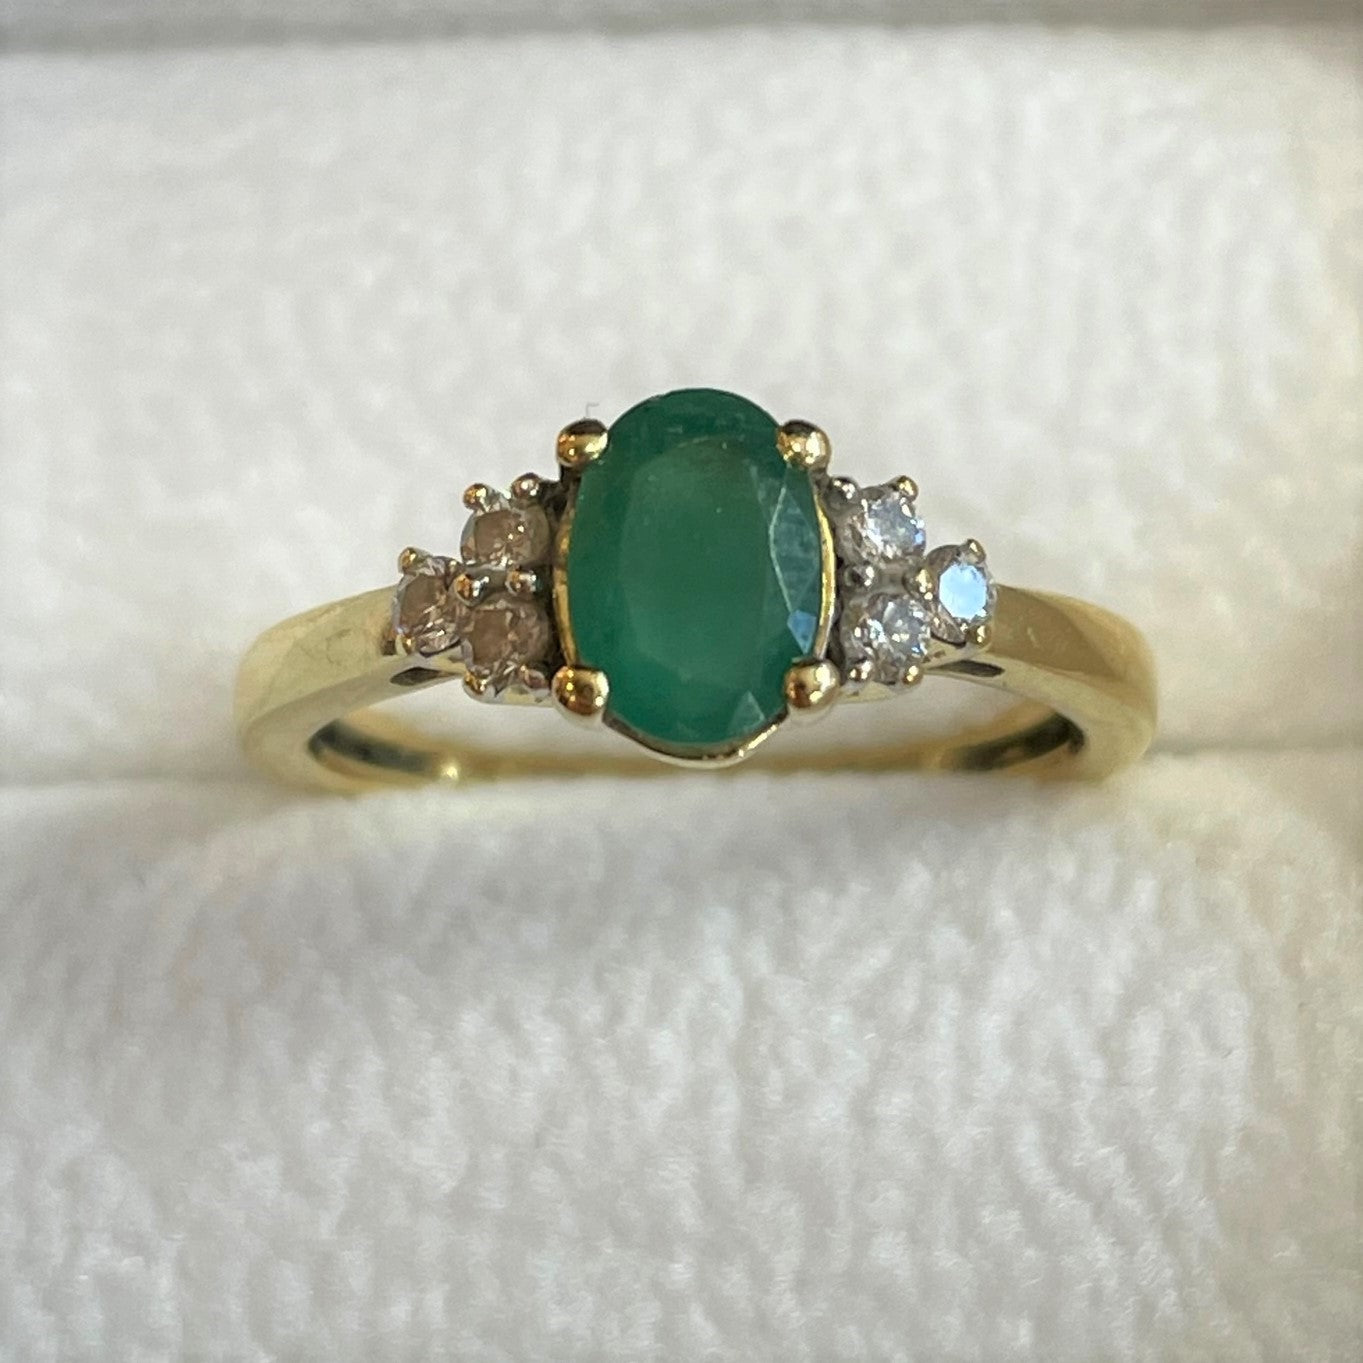 Milton & Humble Jewellery Second Hand 18ct Yellow Gold Polished Emerald &  Diamond Ring, Dated Circa 1970s at John Lewis & Partners